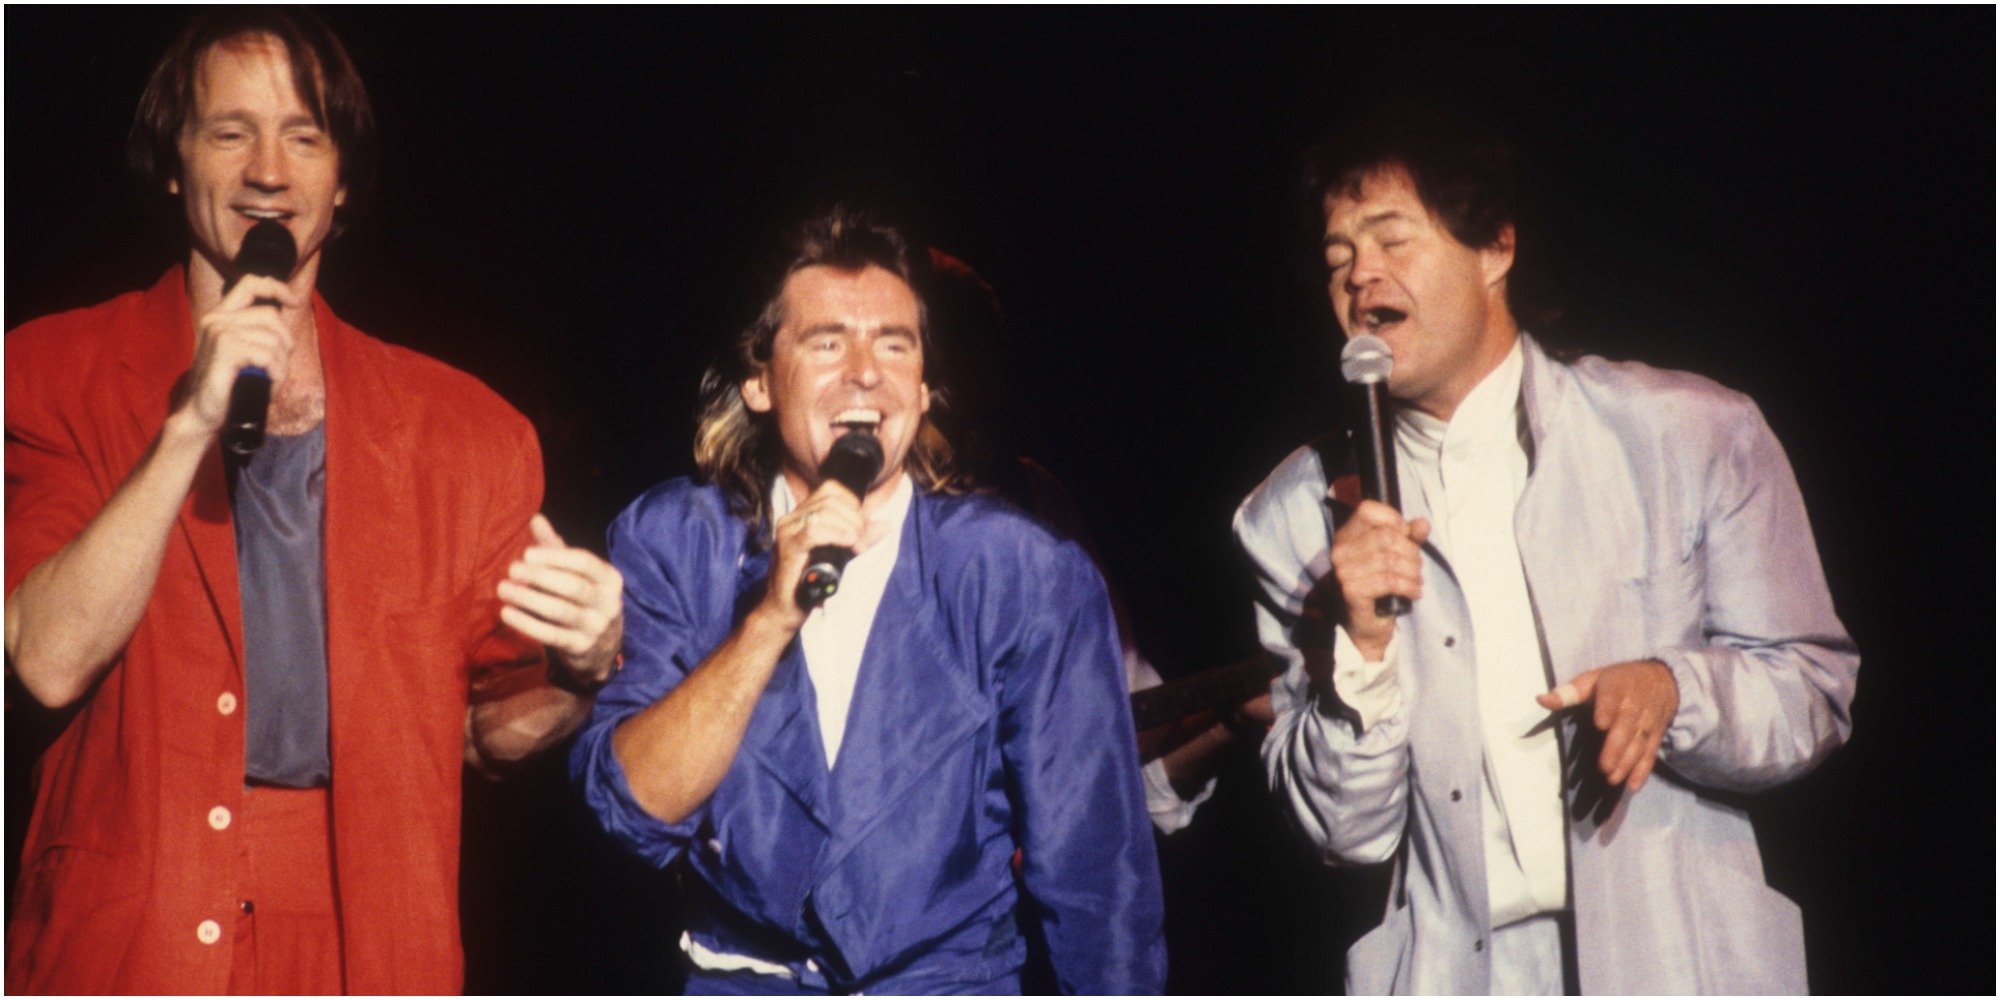 Peter Tork, Davy Jones and Micky Dolenz on tour in 1986.